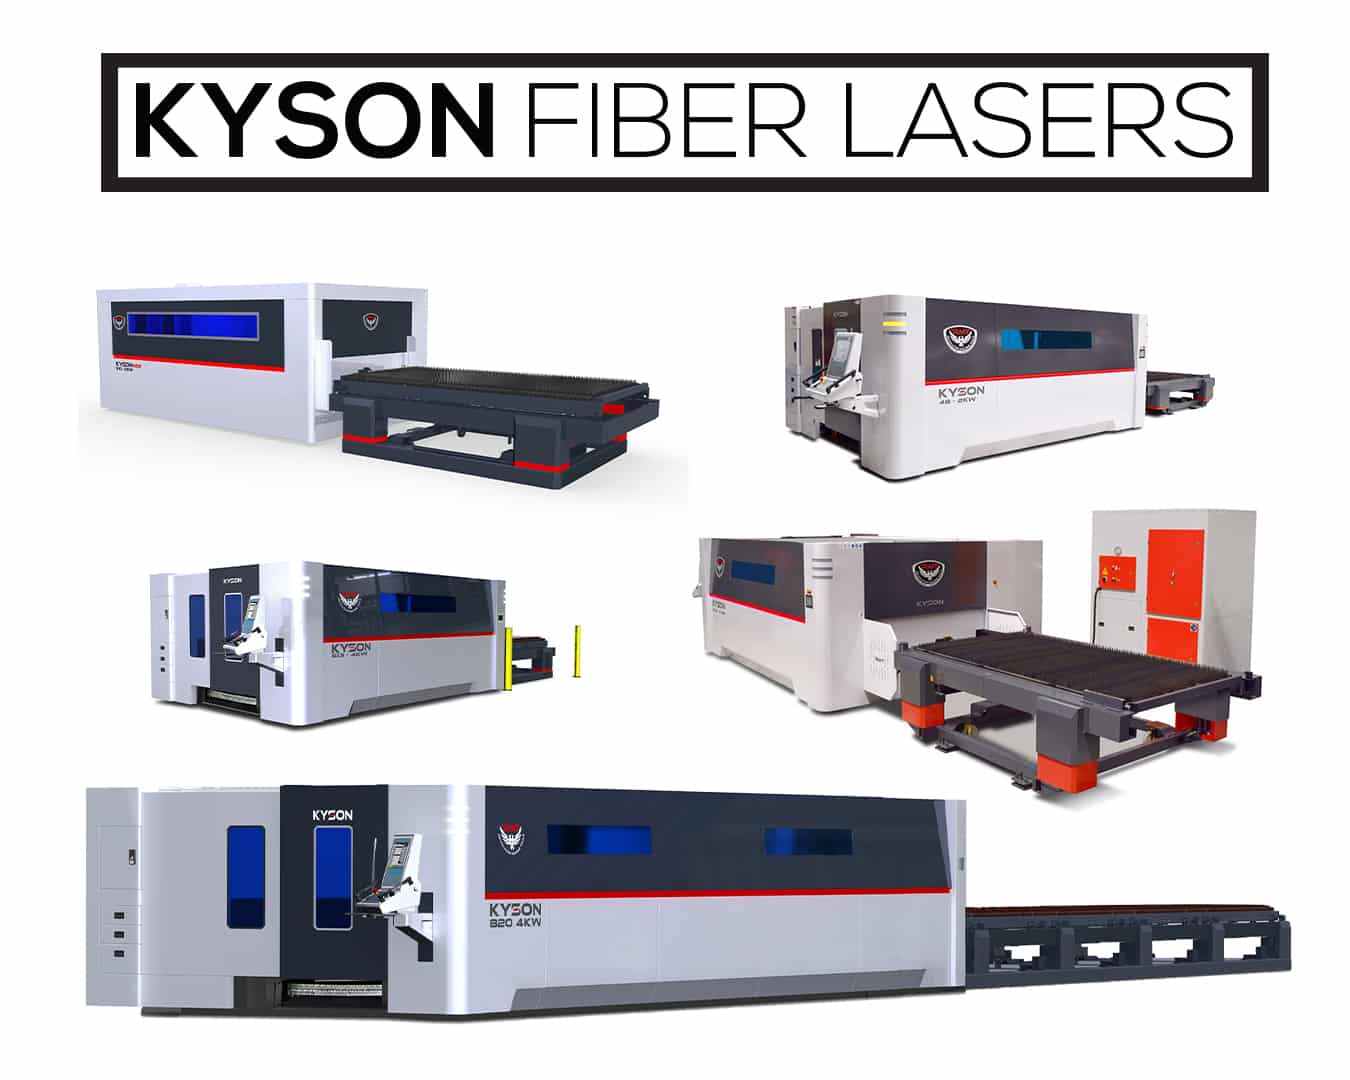 Why Choose a KYSON Laser from RMT?